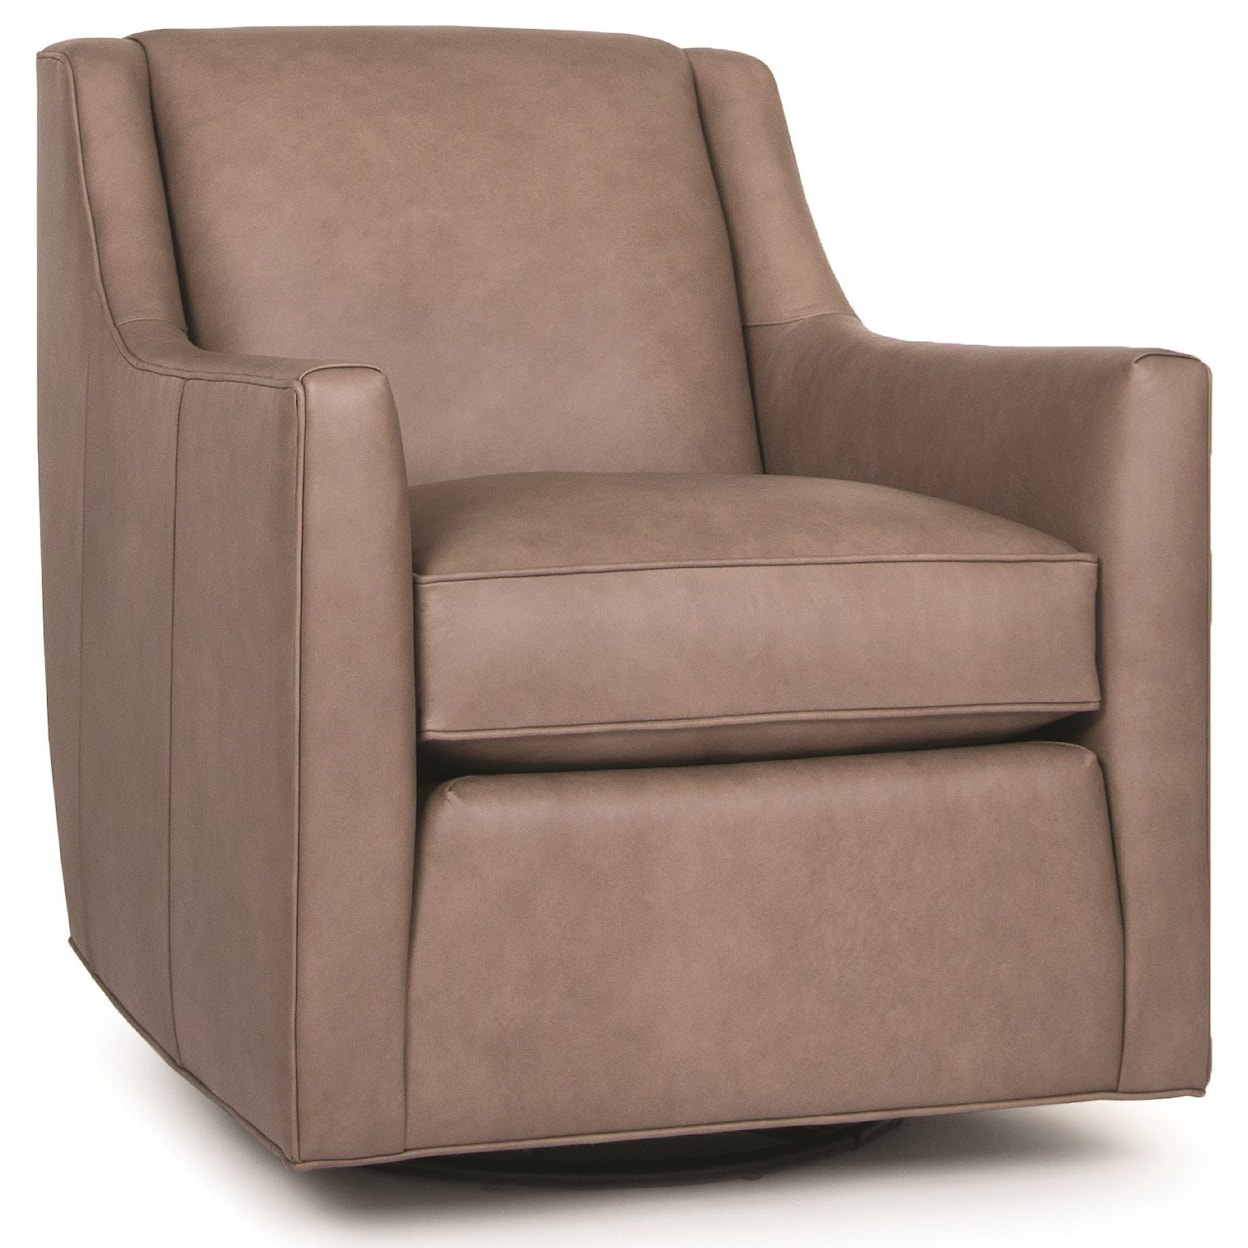 Smith Brothers 549 Swivel Glider Chair